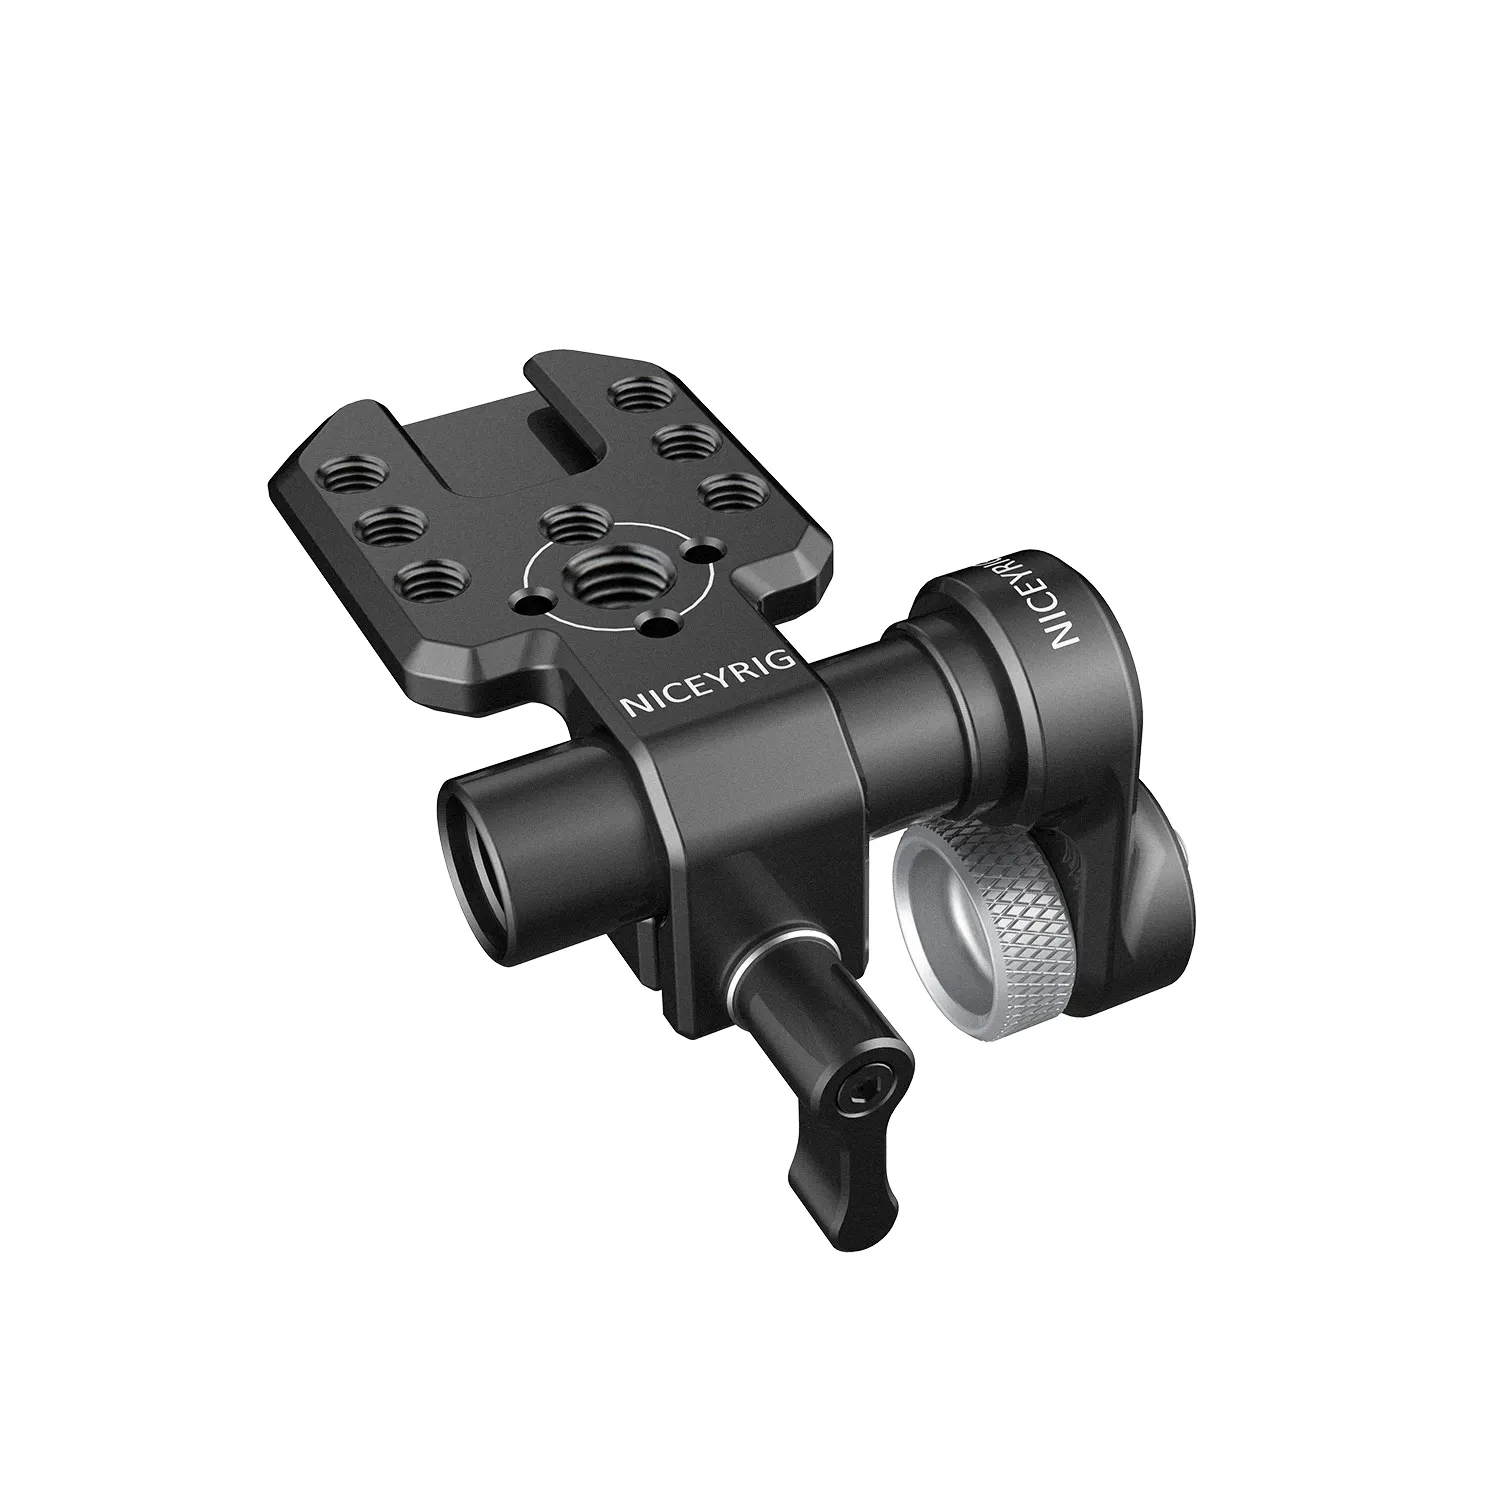 New Style NICEYRIG FX6 Expanded EVF Bracket camera bracket handle grip for video outdoor photography